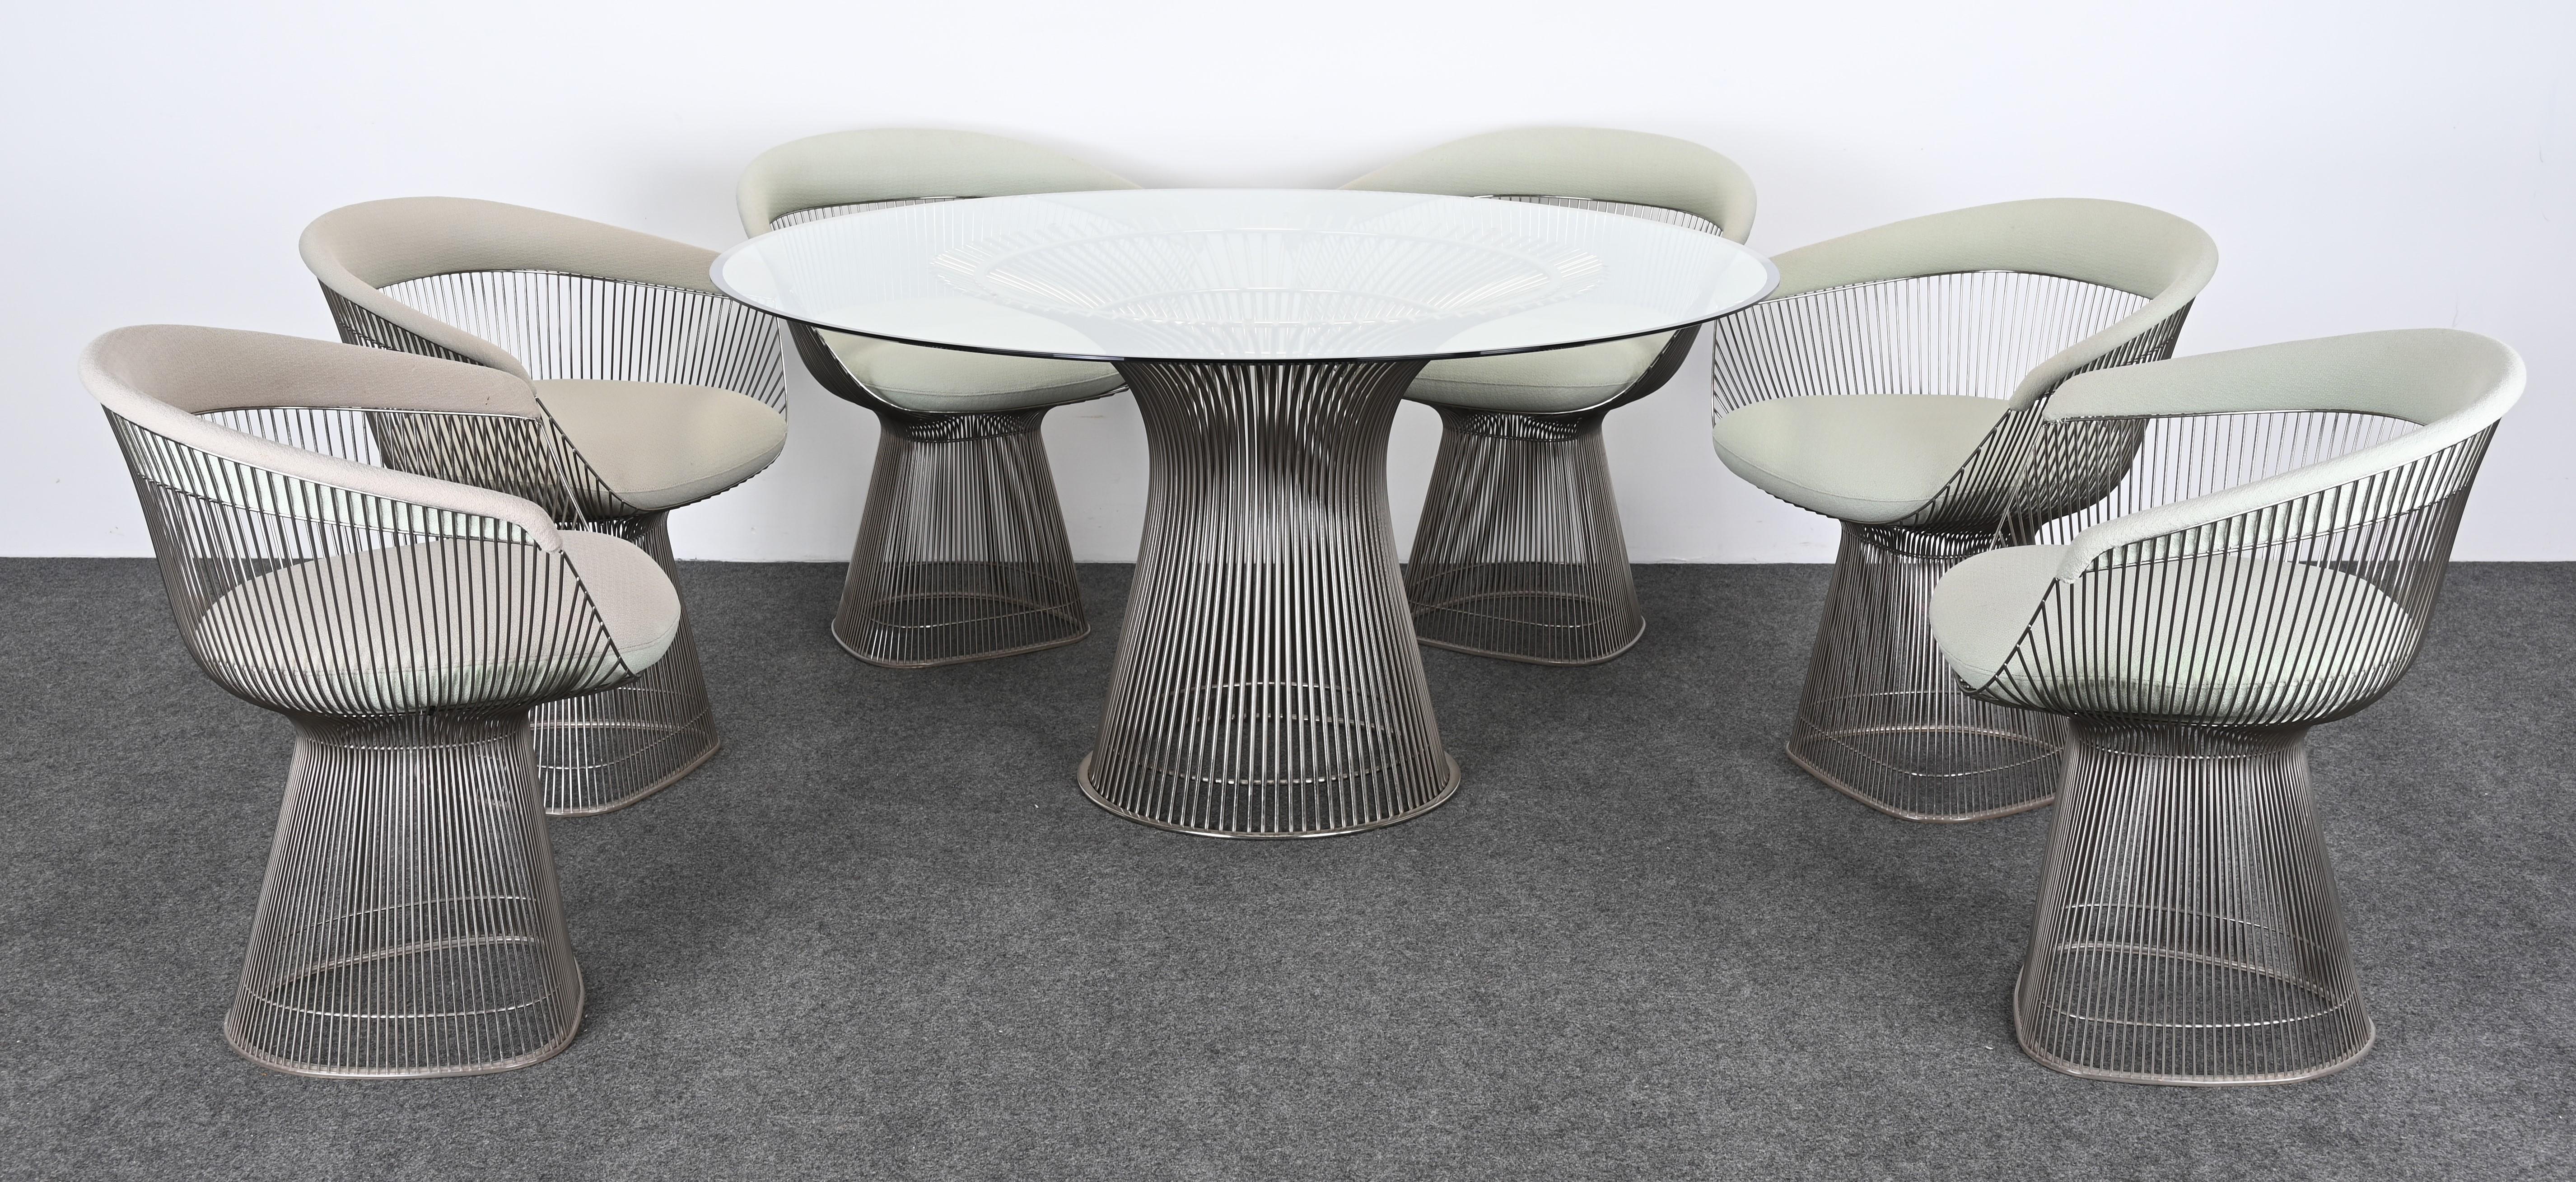 Set of Six Dining Chairs Designed by Warren Platner for Knoll, 20th Century For Sale 11